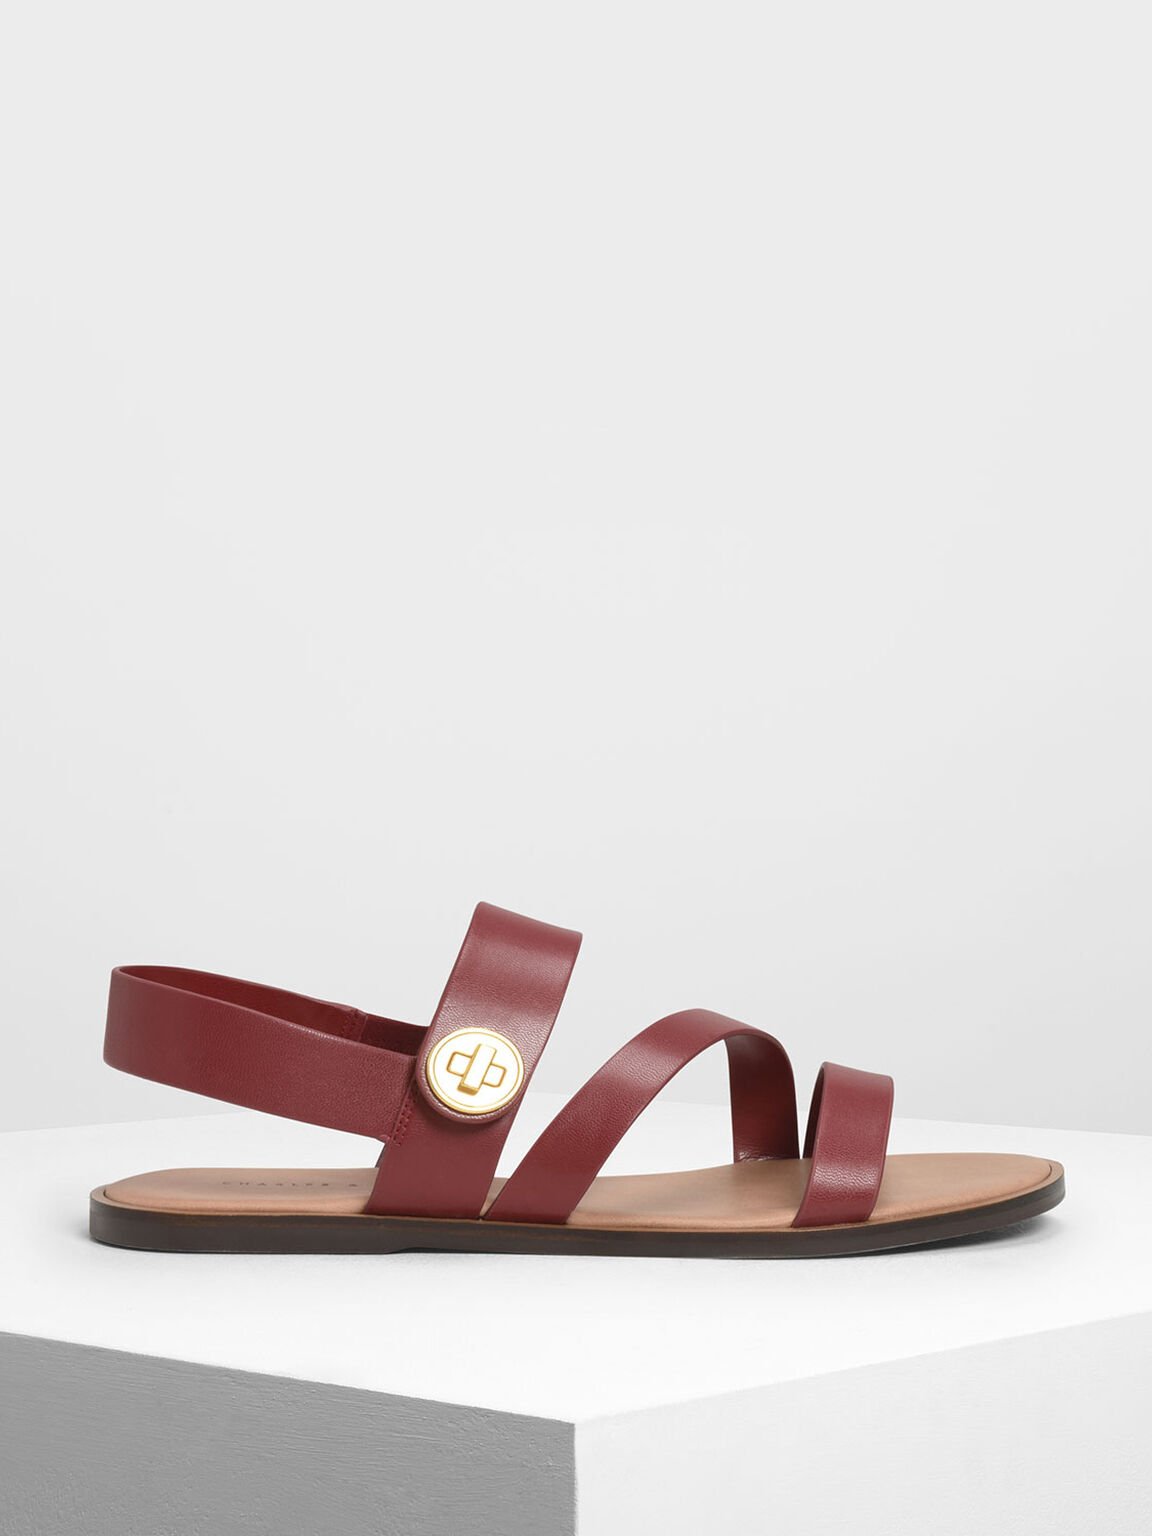 Asymmetric Strappy Sandals, Red, hi-res